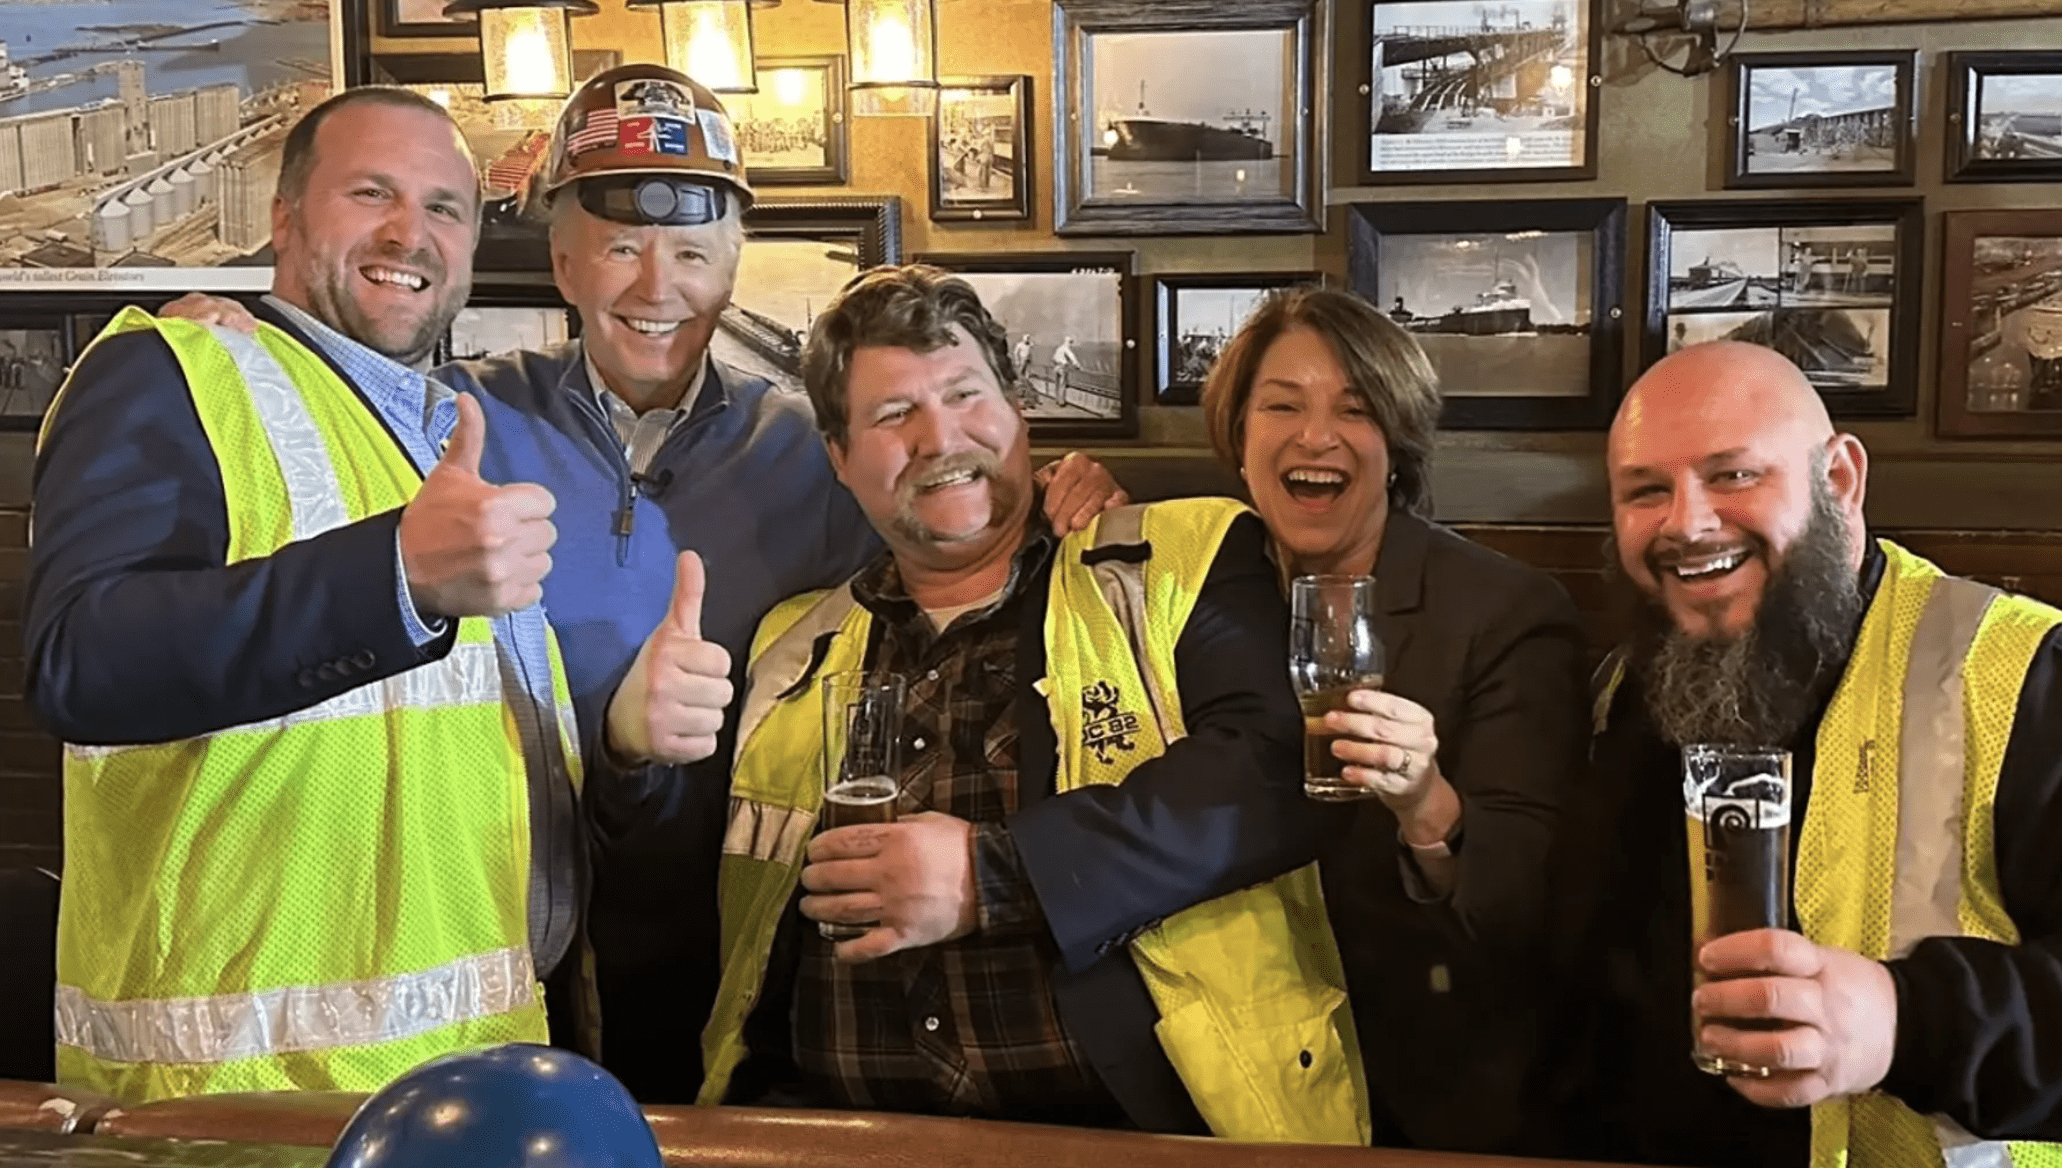 The left-leaning political fact checker Snopes reversed one of its rulings this weekend to admit that President Biden did, in fact, wear a construction hard hat backwards. (Twitter @amyklobuchar)